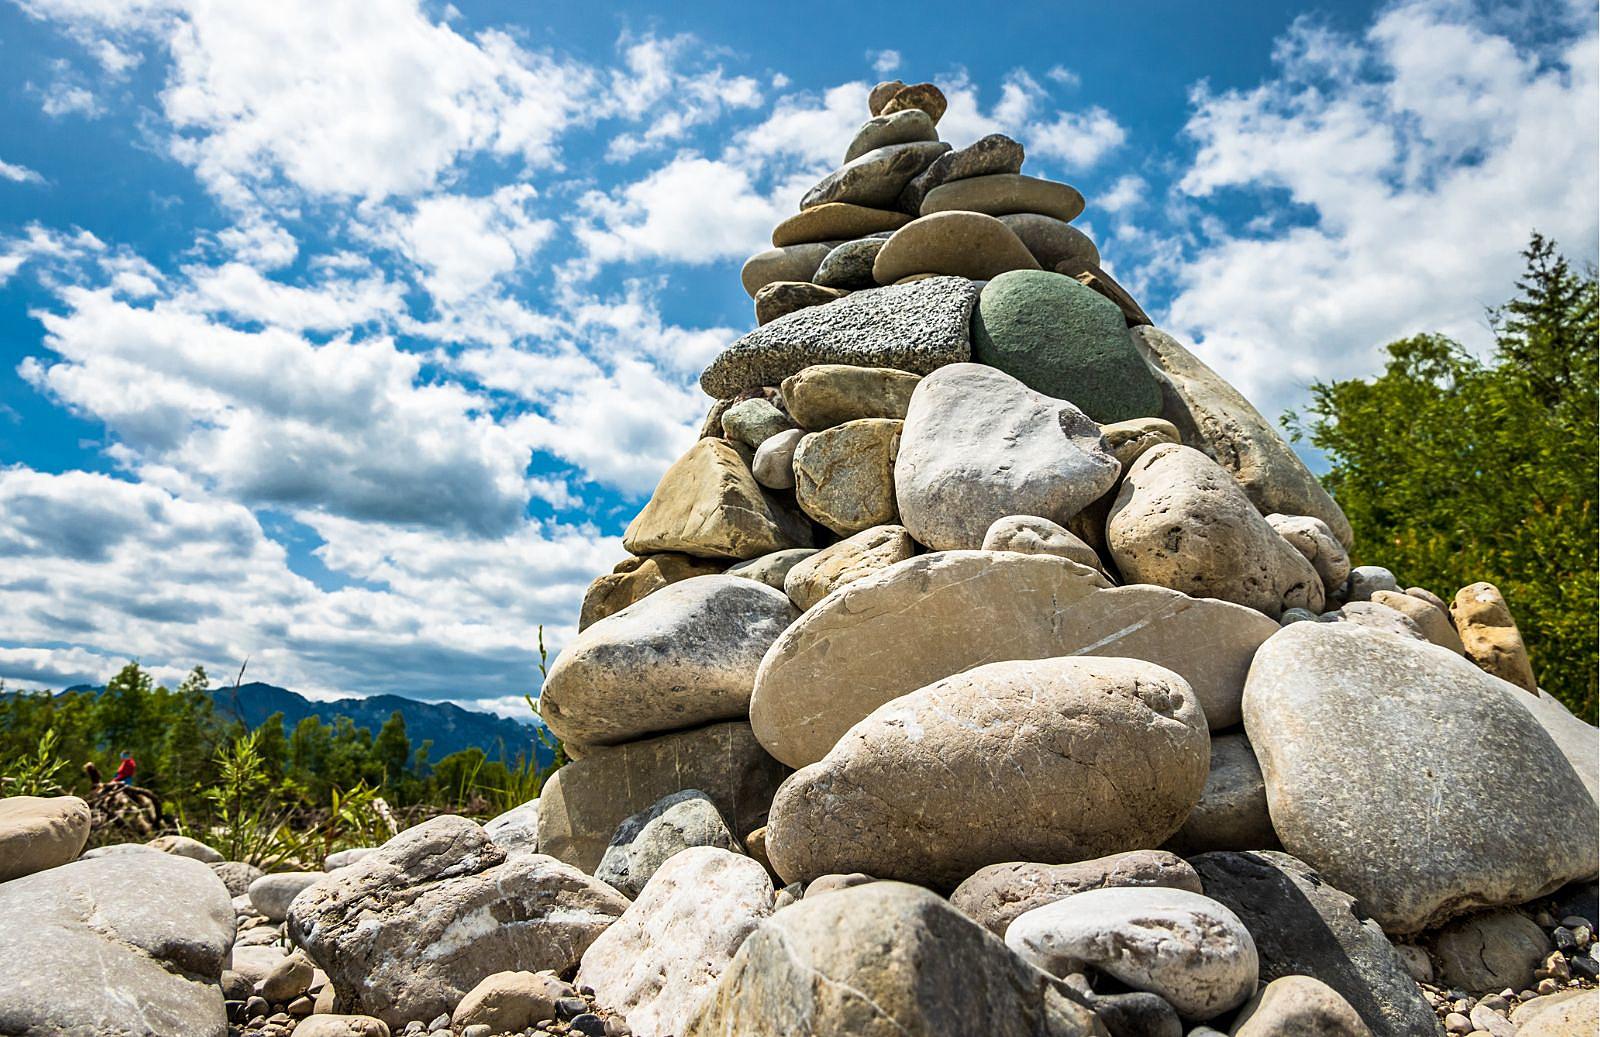 Rock stacking in national parks: Why is it bad?